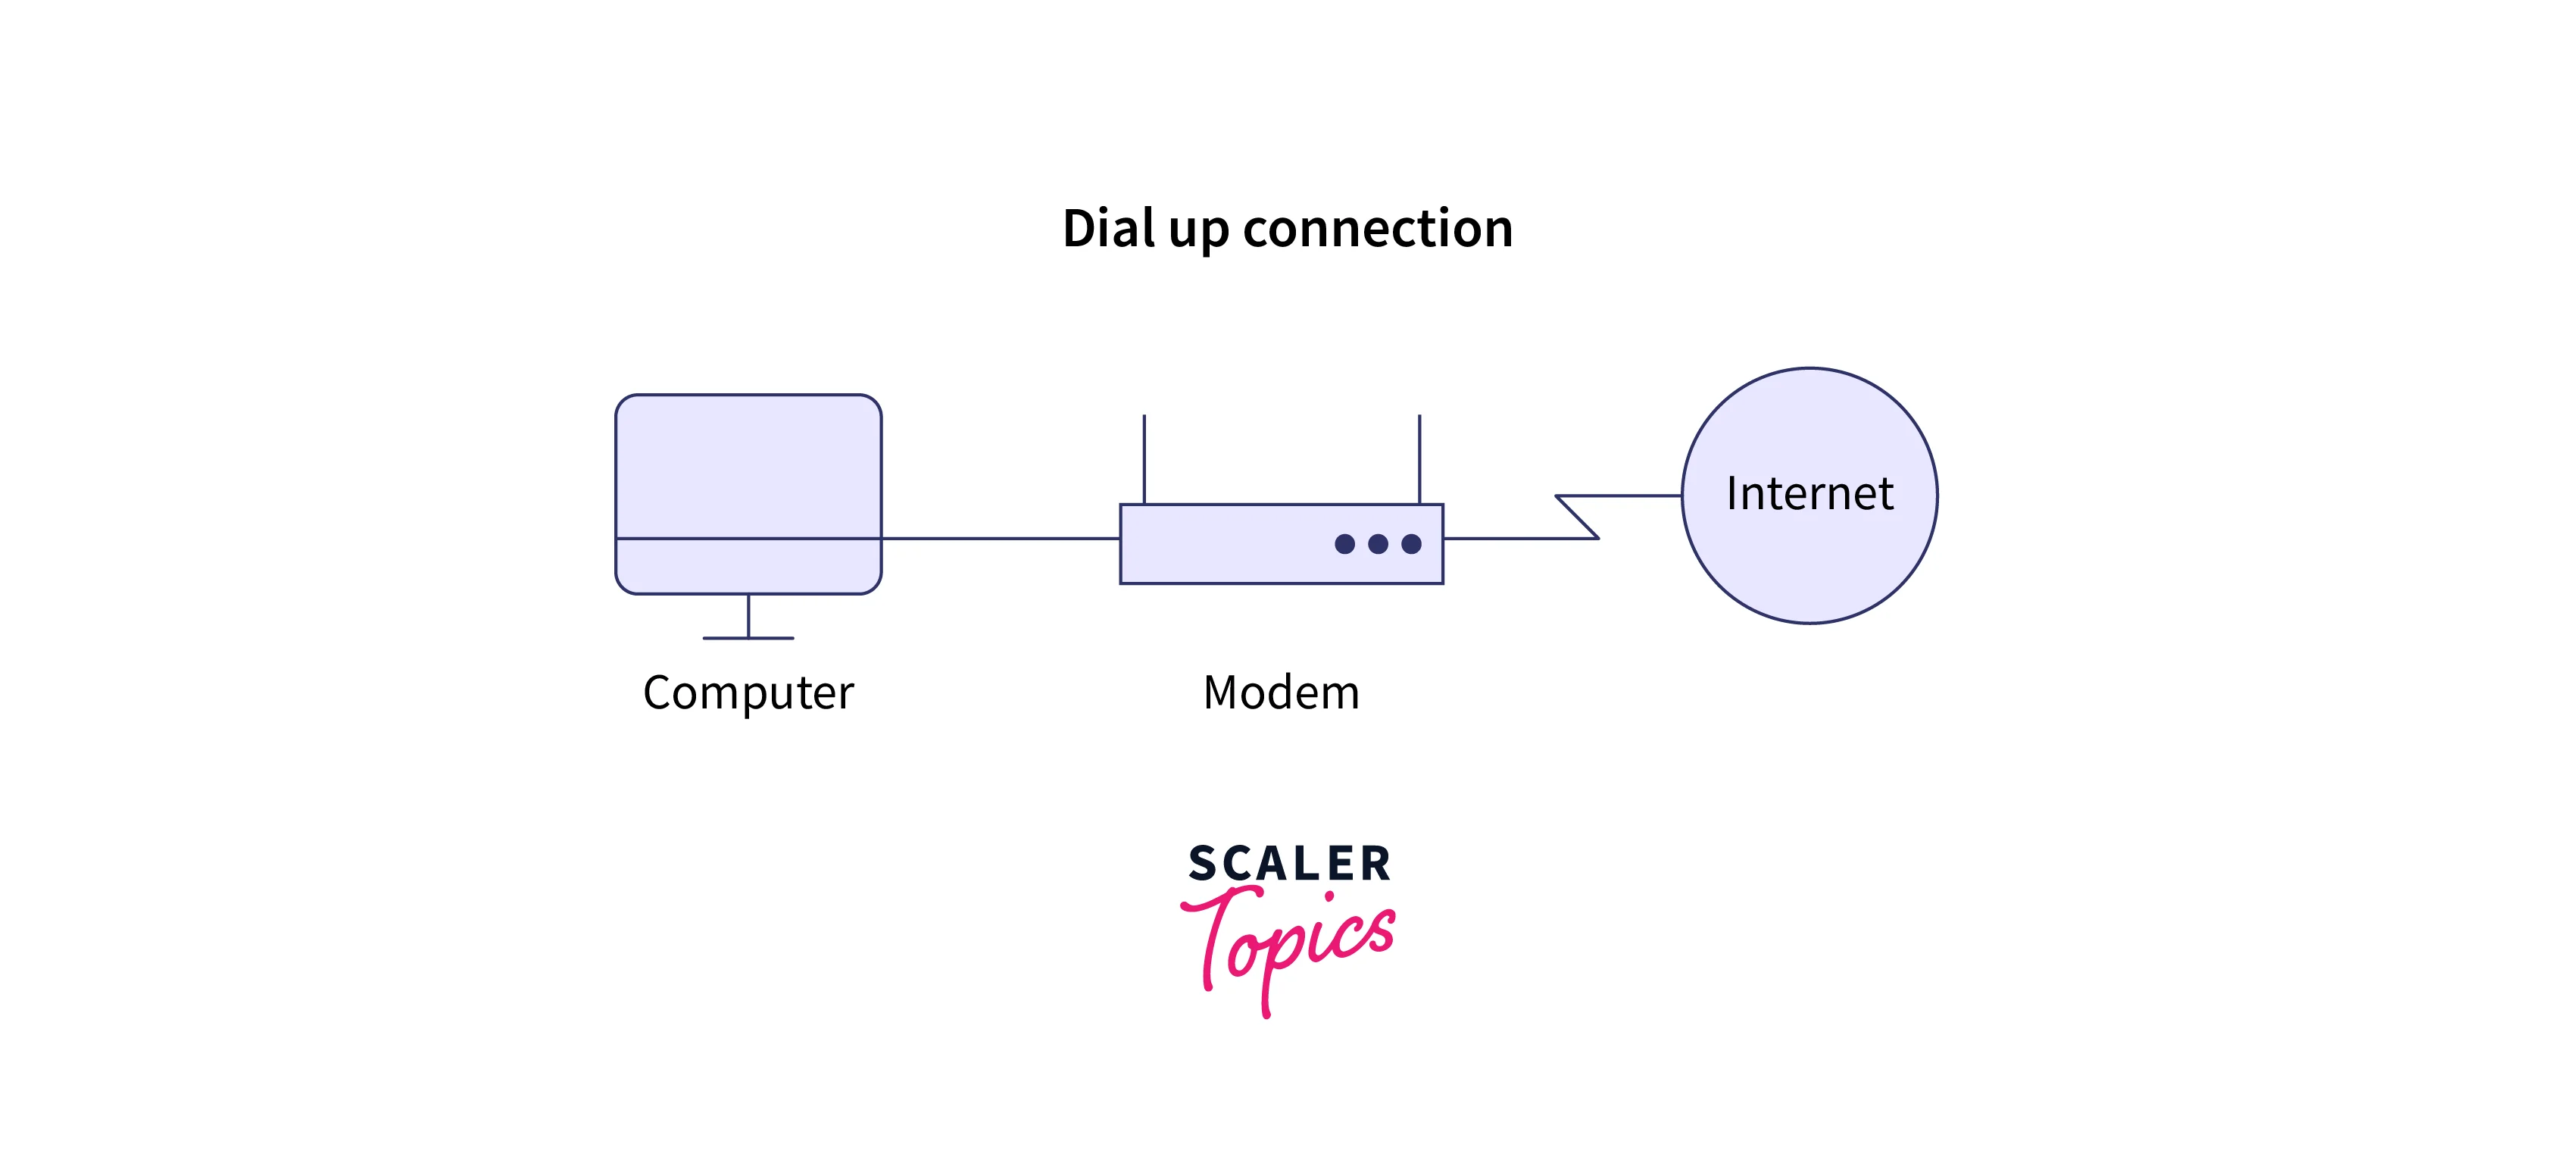 image for dial up